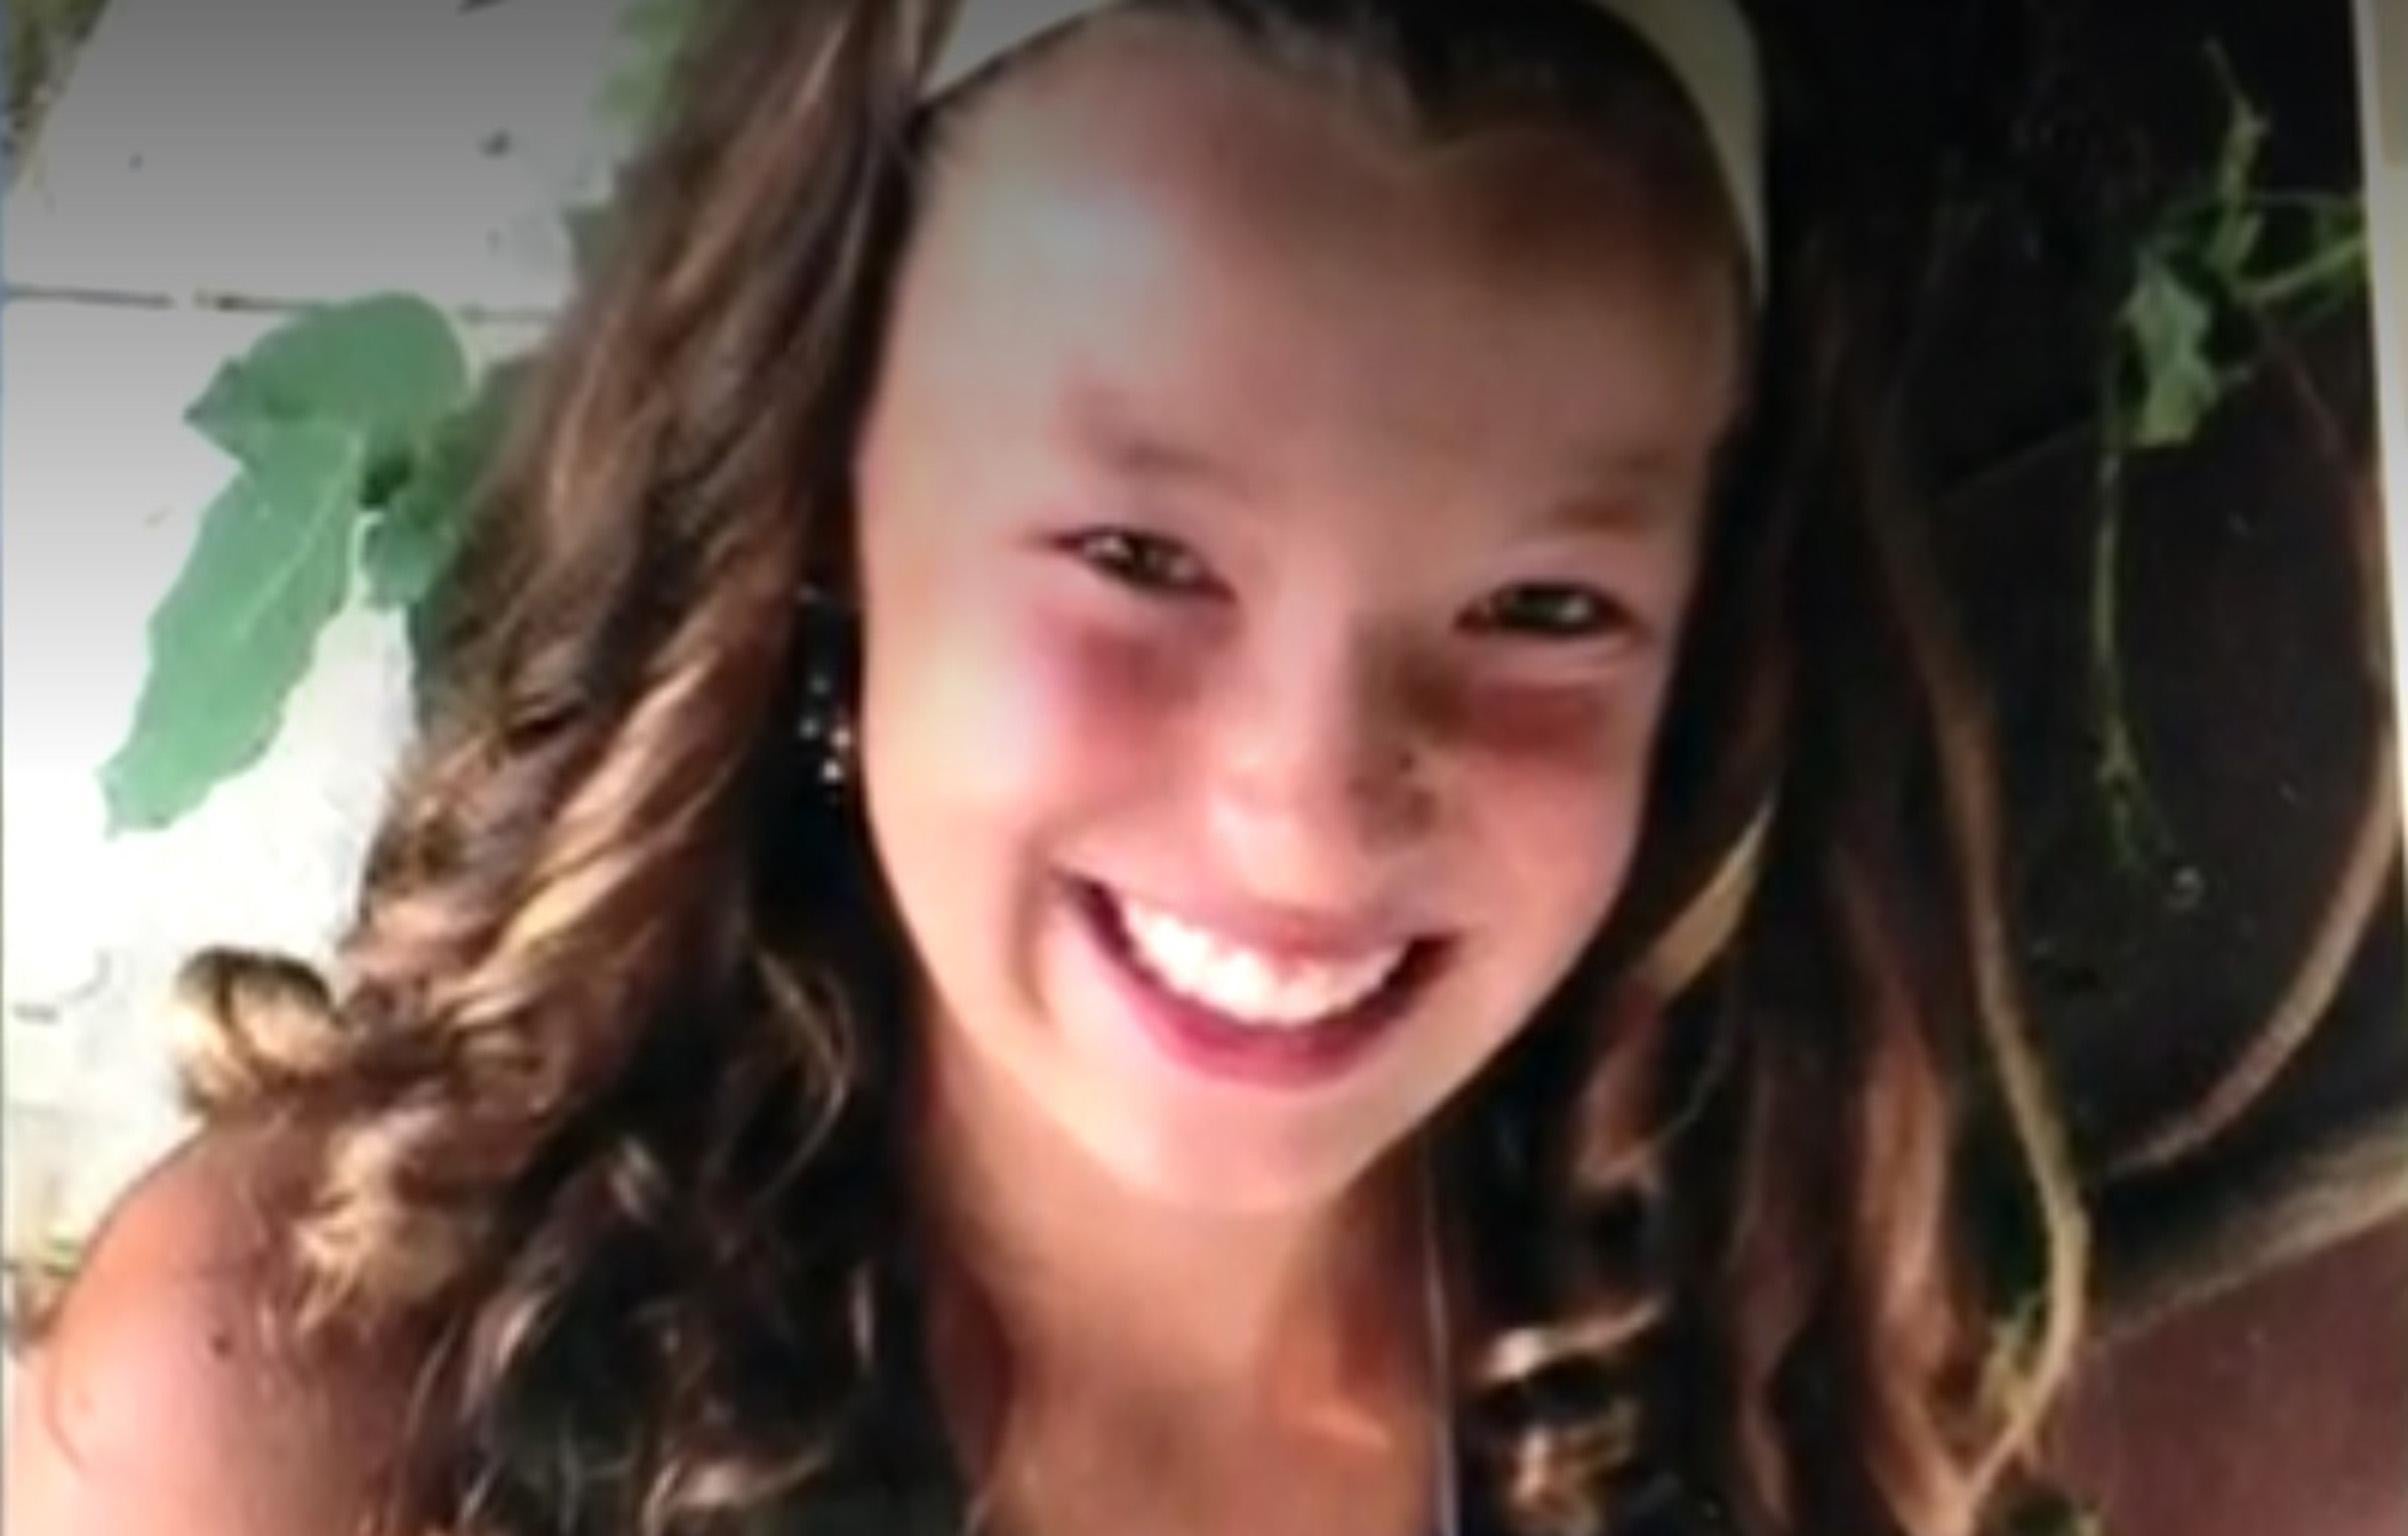 Morgan Kuiper, 11, was accidentally shot in her back garden but survived